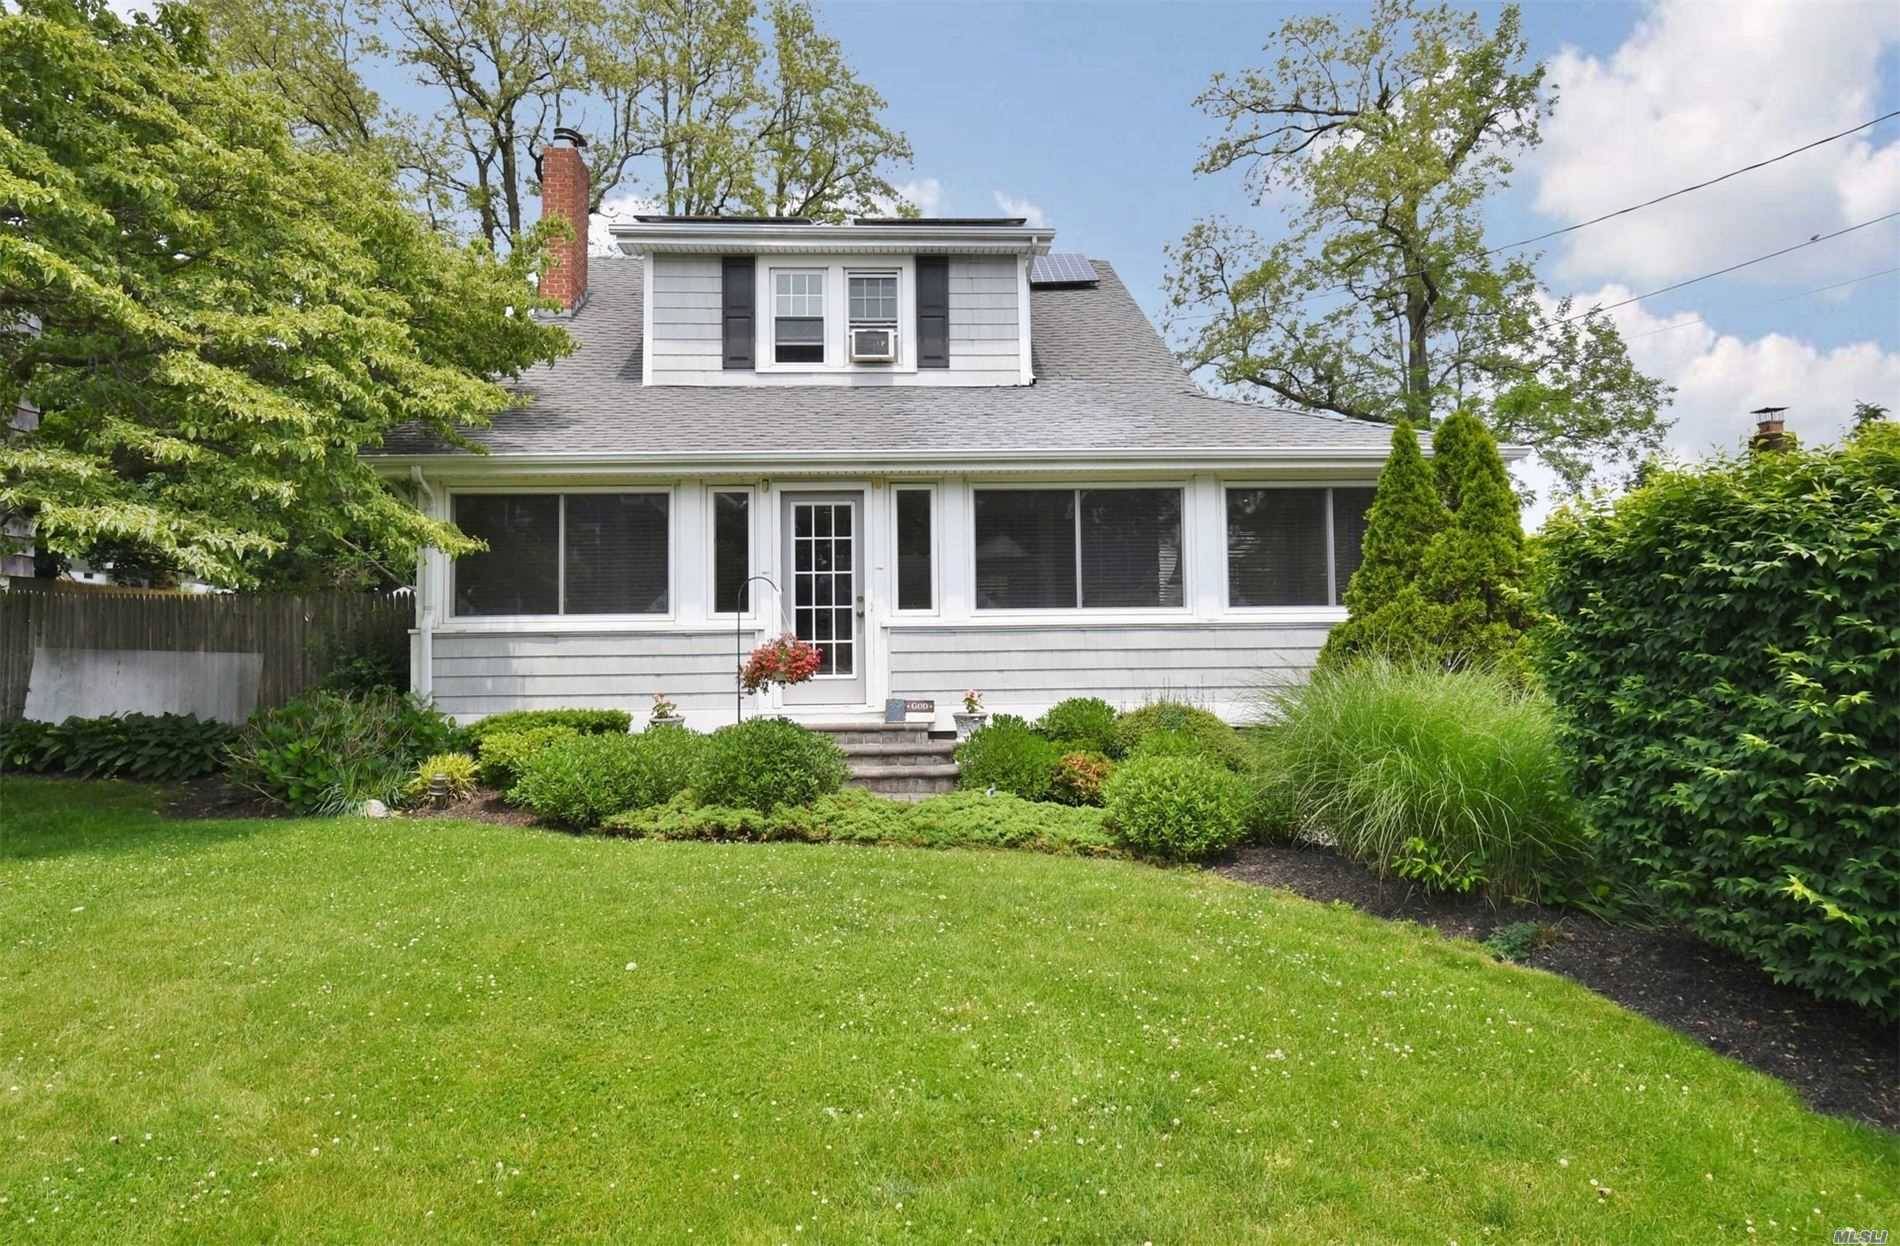 Charming 1925 Sweet Colonial with Enclosed Front Heated Porch, LR with Fpl, FDR, Kitchen with Breakfast Nook, Large Pantry, 3 BRs, 2 Full Baths 1 Full On each Floor, Full ...